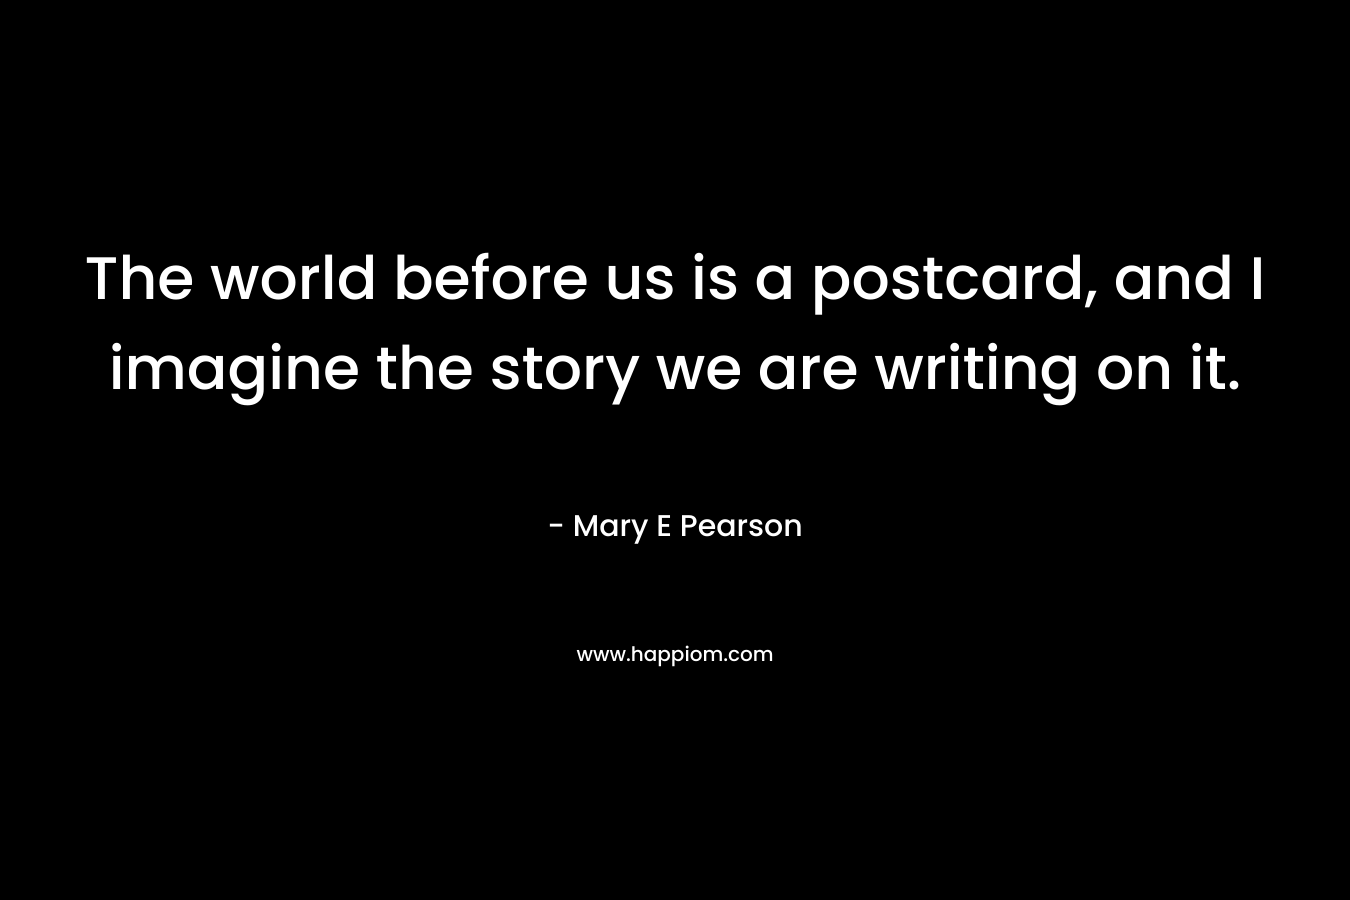 The world before us is a postcard, and I imagine the story we are writing on it. – Mary E Pearson